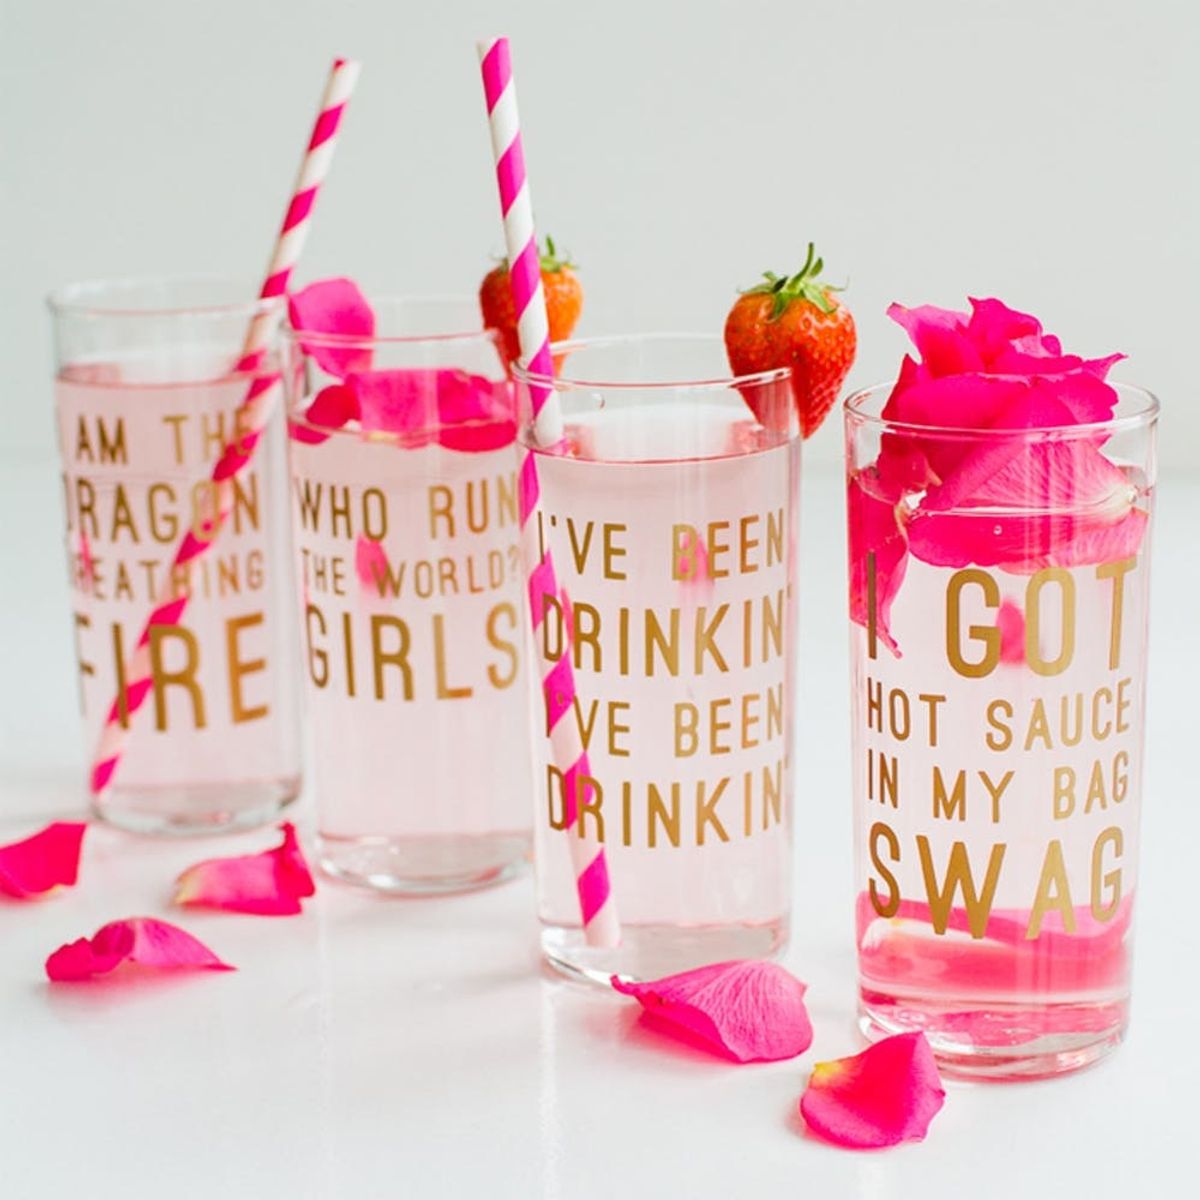 DIY These Flawless Beyoncé Lyric Glasses for Your Bestie’s Bachelorette Party